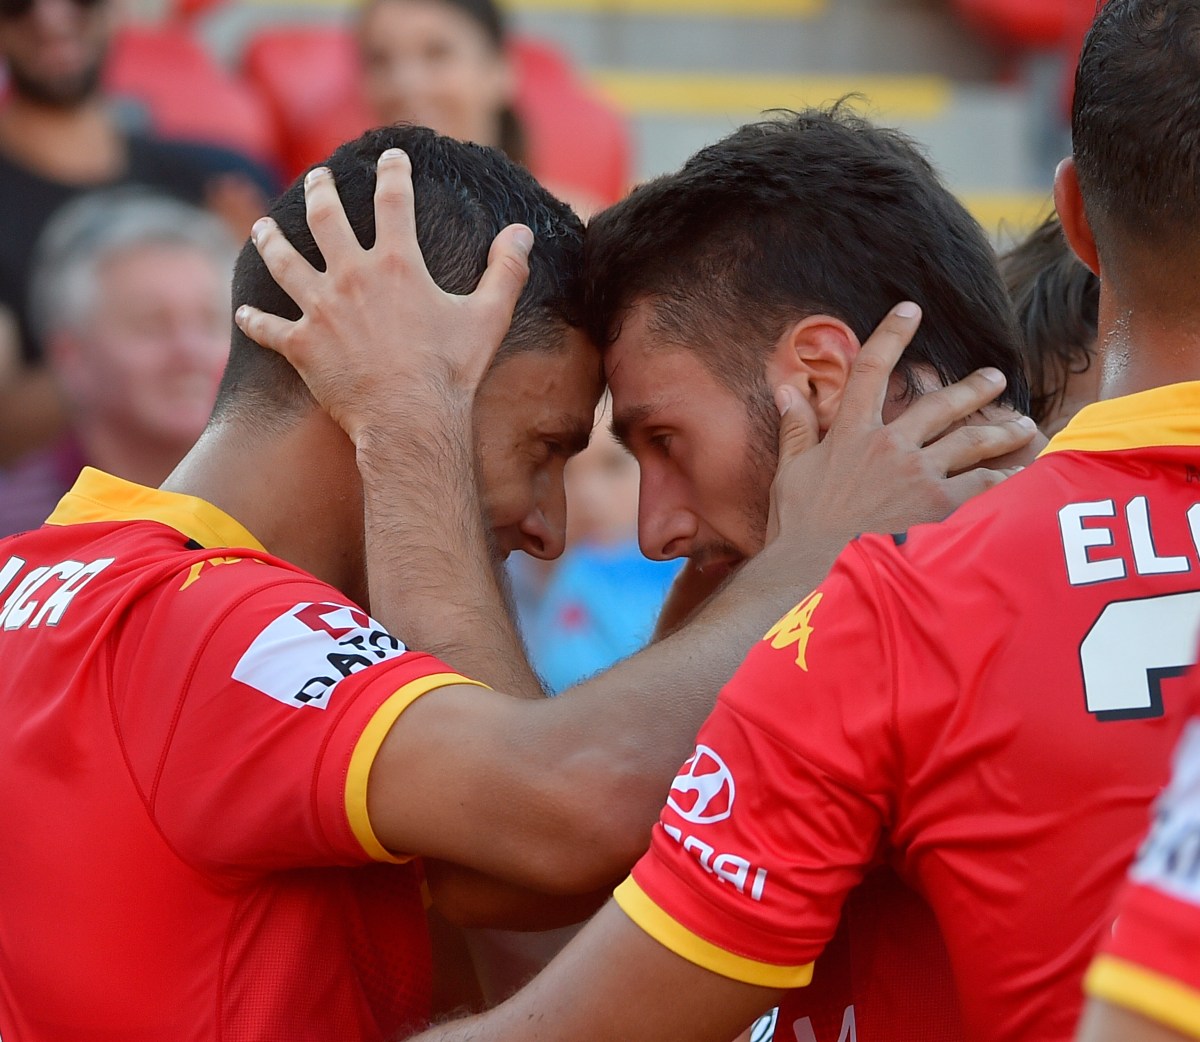 Marcelo Carrusca of United (L) celebrates his goal with George Mells during the round 17 A-League match between the Adelaide United and Newcastle Jets at Coopers Stadium in Adelaide, on Sunday, Jan. 31, 2016. (AAP Image/David Mariuz) NO ARCHIVING, EDITORIAL USE ONLY